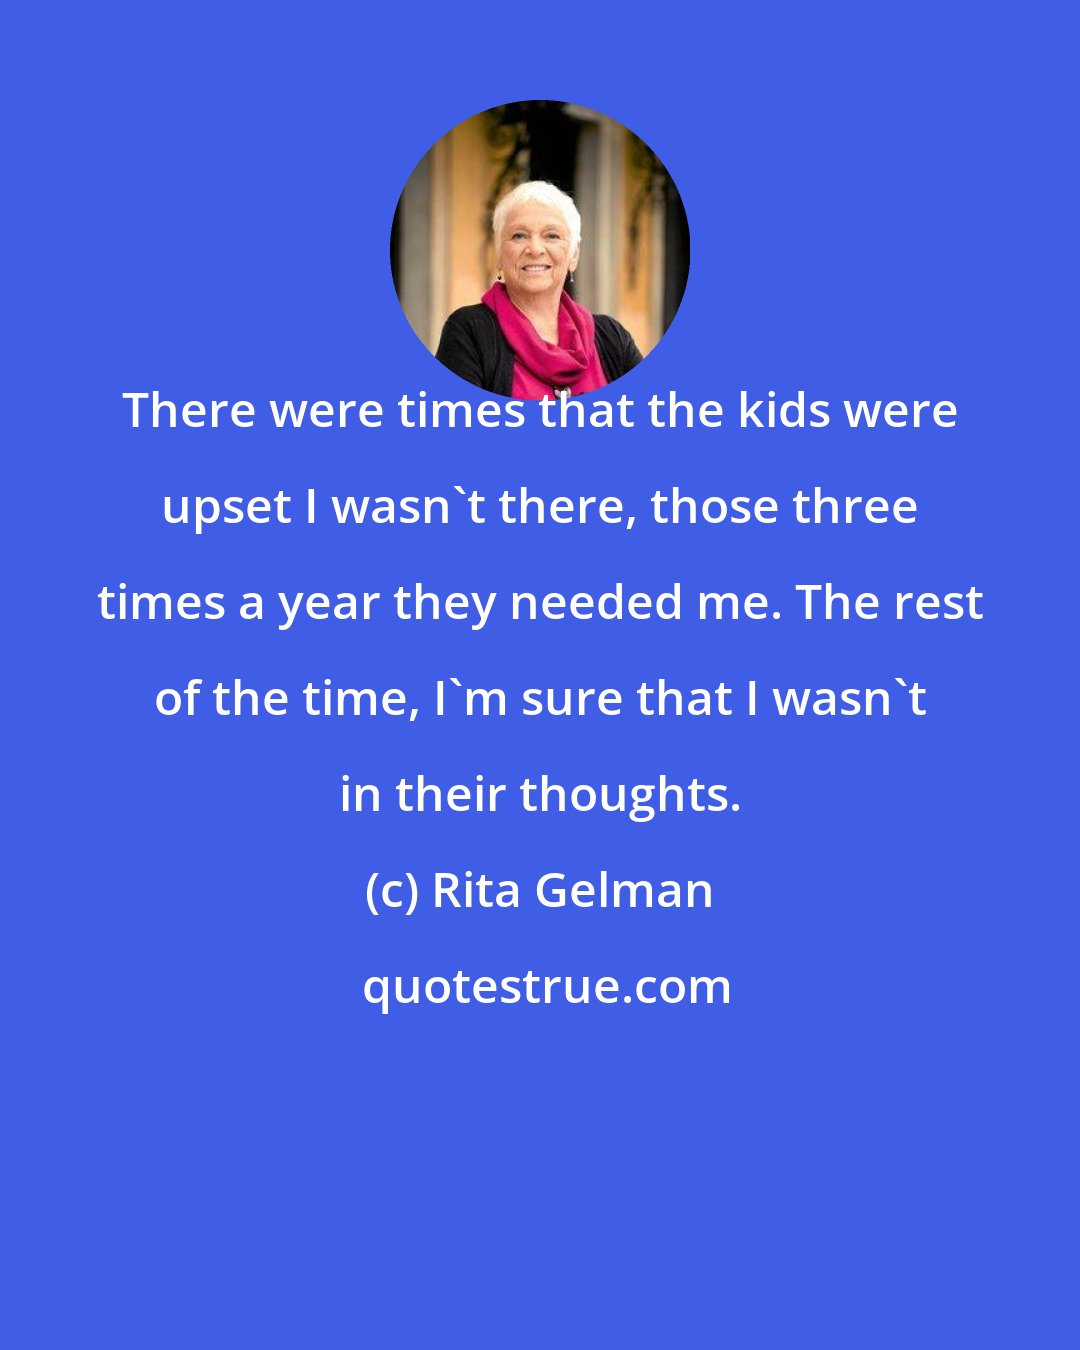 Rita Gelman: There were times that the kids were upset I wasn't there, those three times a year they needed me. The rest of the time, I'm sure that I wasn't in their thoughts.